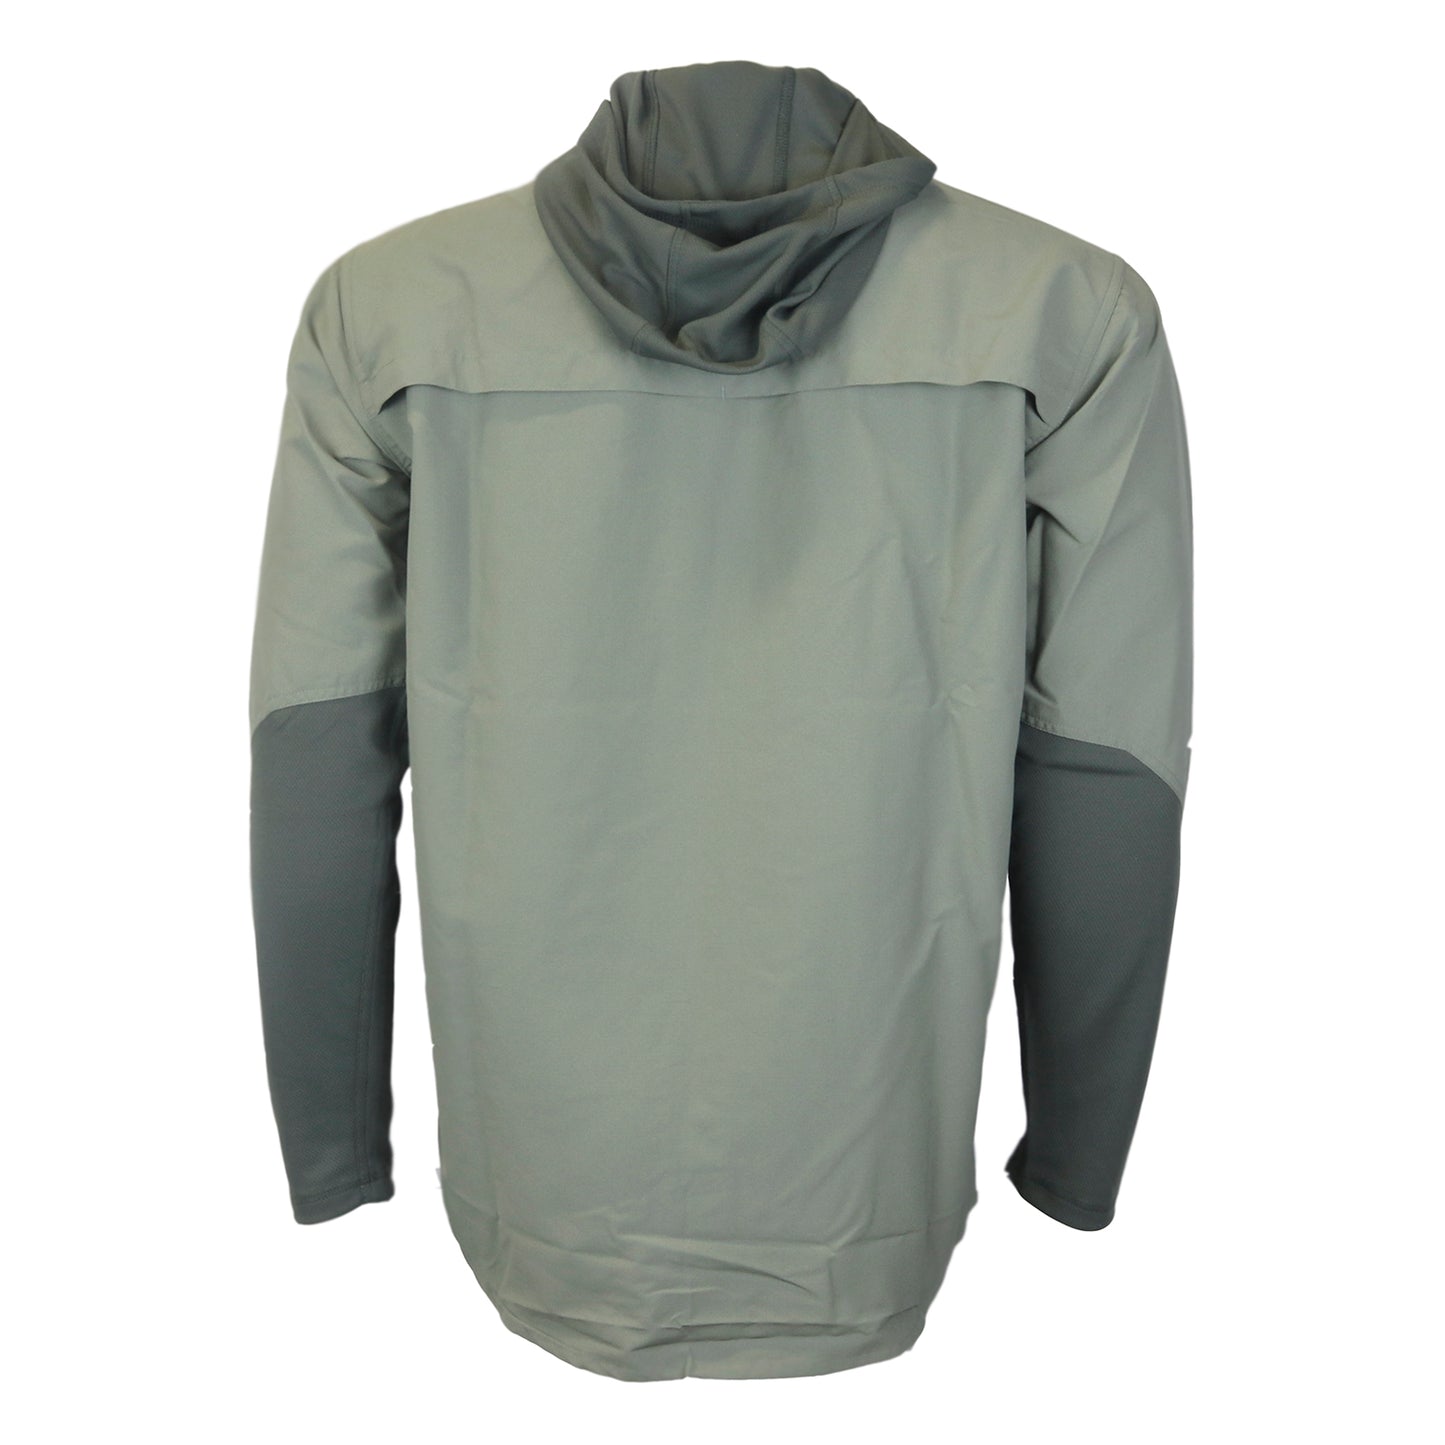 A back view of A sage green button up shirt with crew sleeves, a collar and hood down over the back.